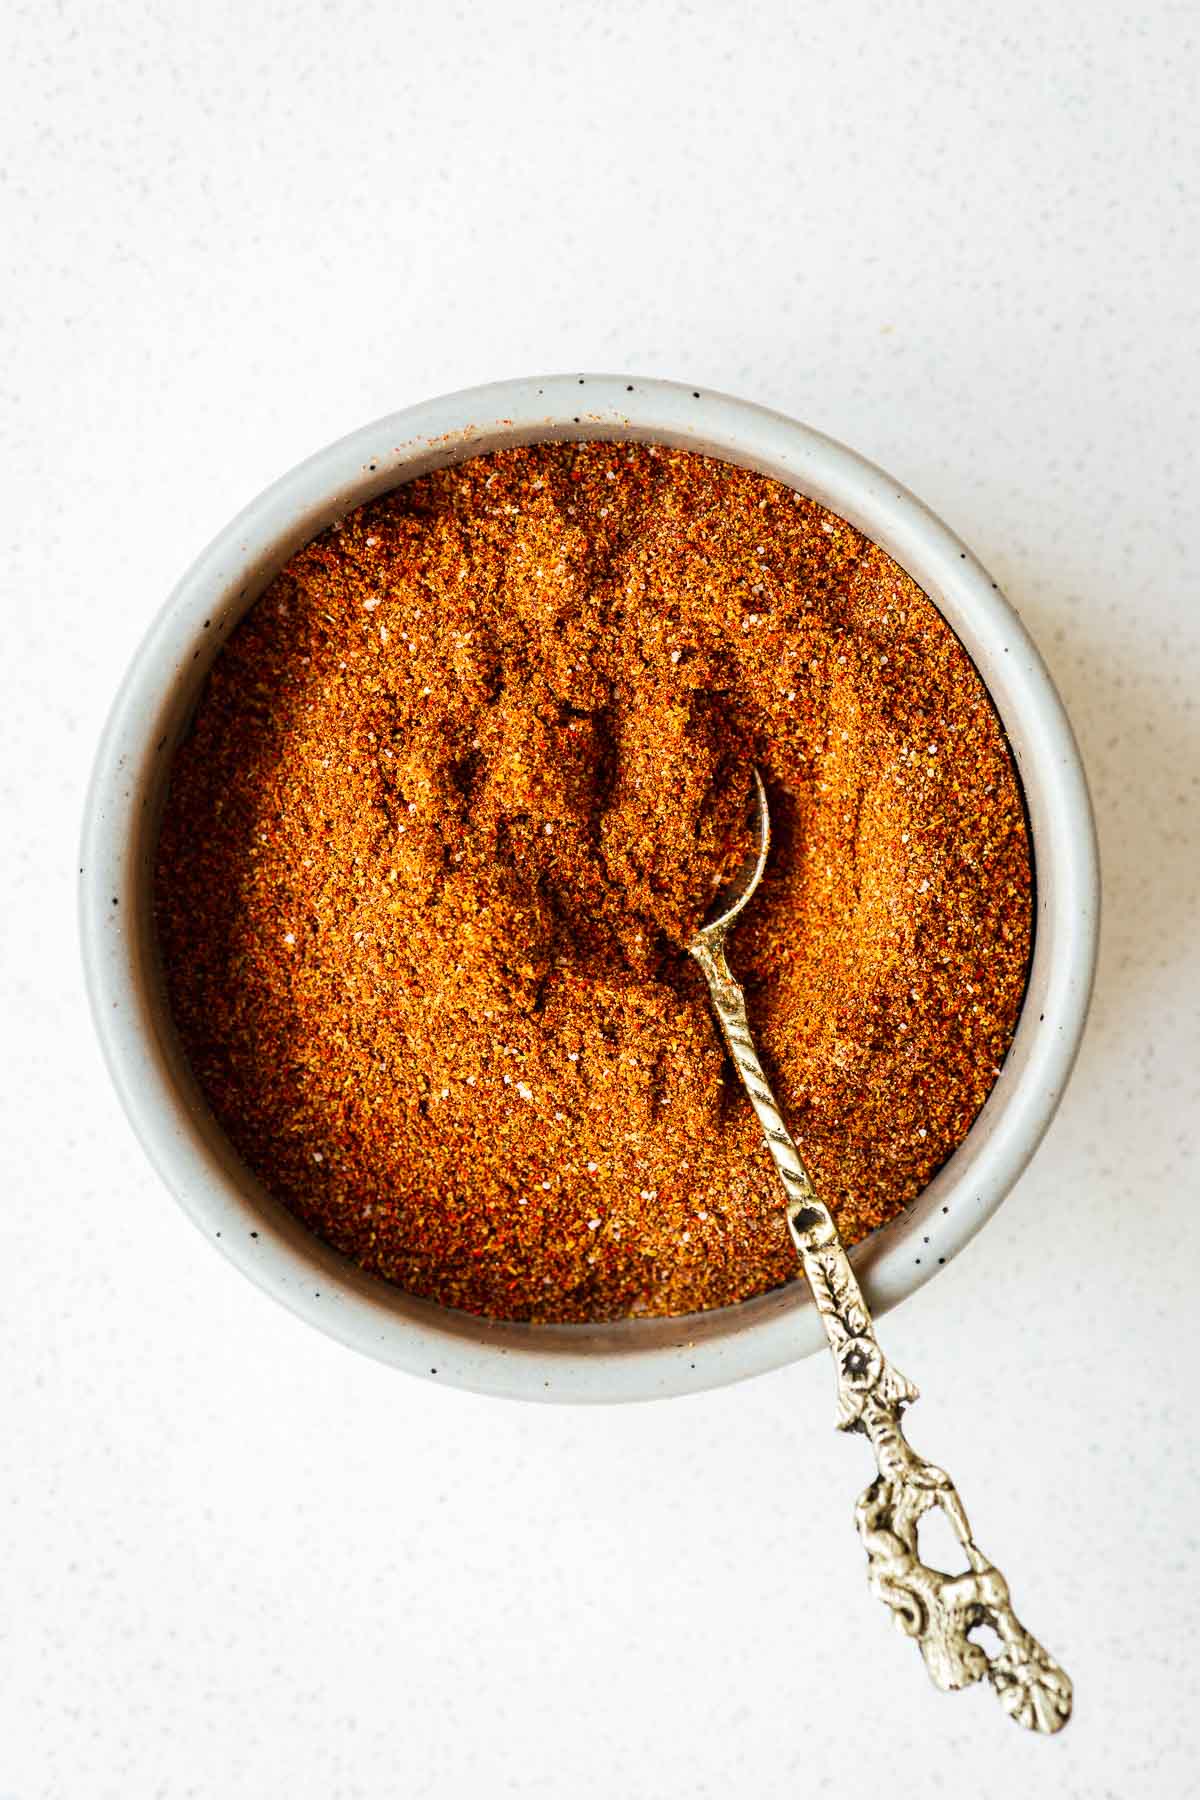 A bowl of harissa powder substitute (a simple ground spice blend) and a small teaspoon.